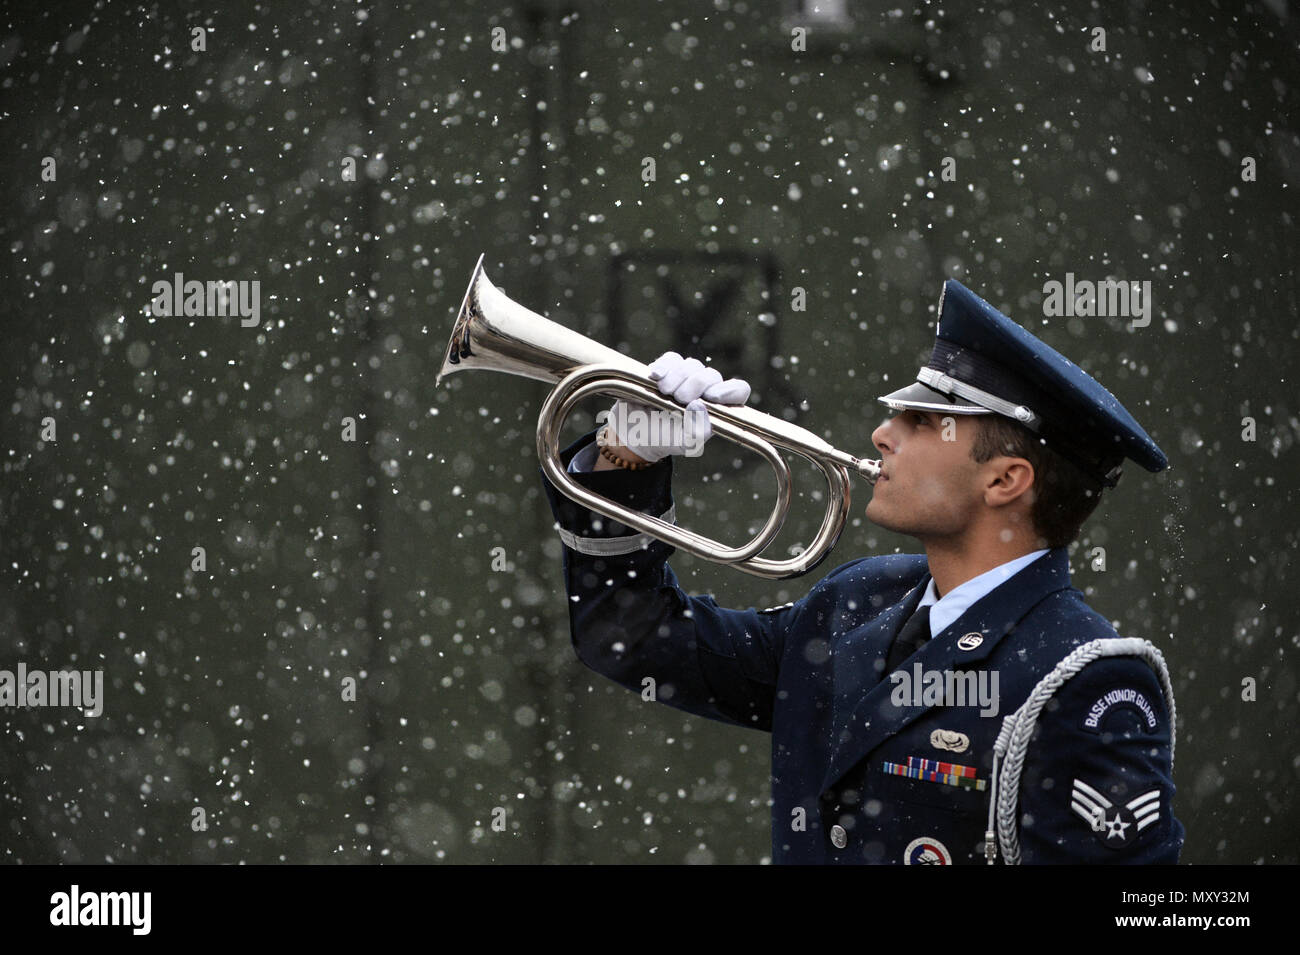 WESTHAMPTON BEACH, NY - Senior Airman Avery Friedman, a member of the 106th Rescue Wing Honor Guard, performs "Taps" during a moment of training at F.S. Gabreski Air National Guard Base, Westhampton Beach, NY on December 15, 2016. (U.S. Air National Guard / Staff Sgt. Christopher S. Muncy) Stock Photo